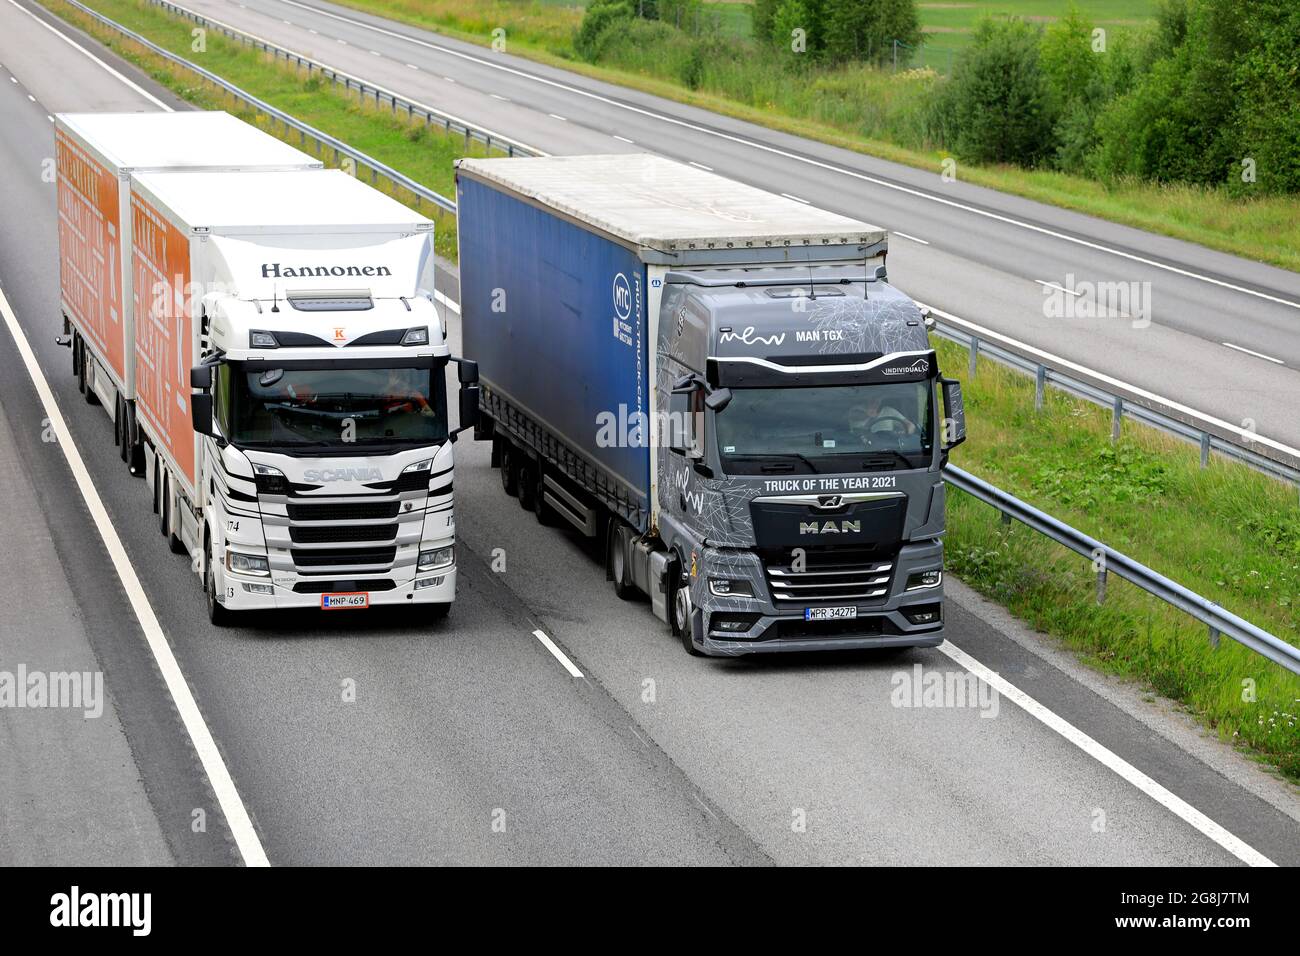 MAN TGX, International Truck of the year 2021, in front of semi trailer overtakes Scania R500 trailer truck on motorway. Salo, Finland. July 9, 2021. Stock Photo